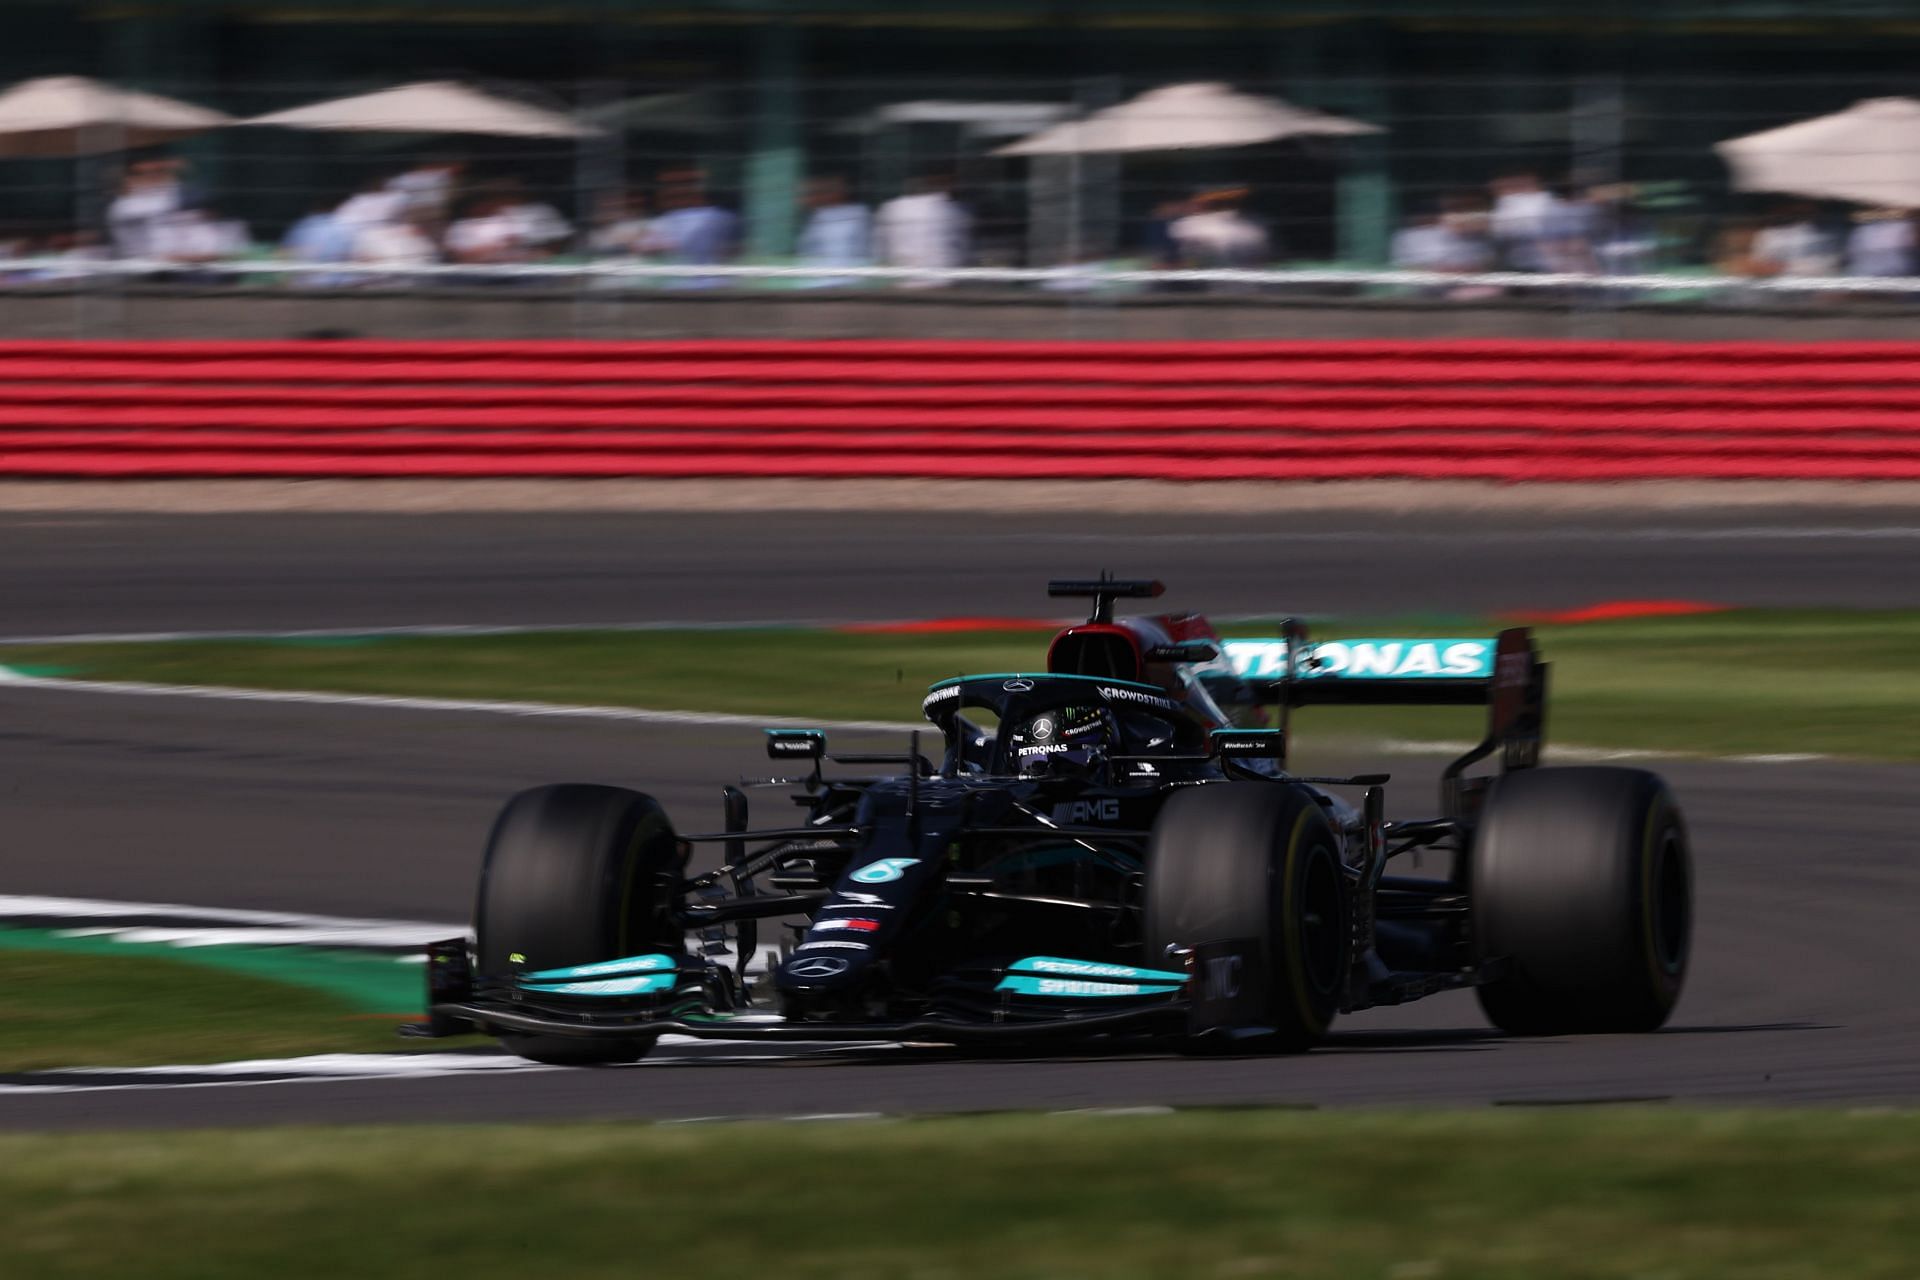 F1 2022 Where to watch the British GP Race? Time, TV schedule, live stream details, and more